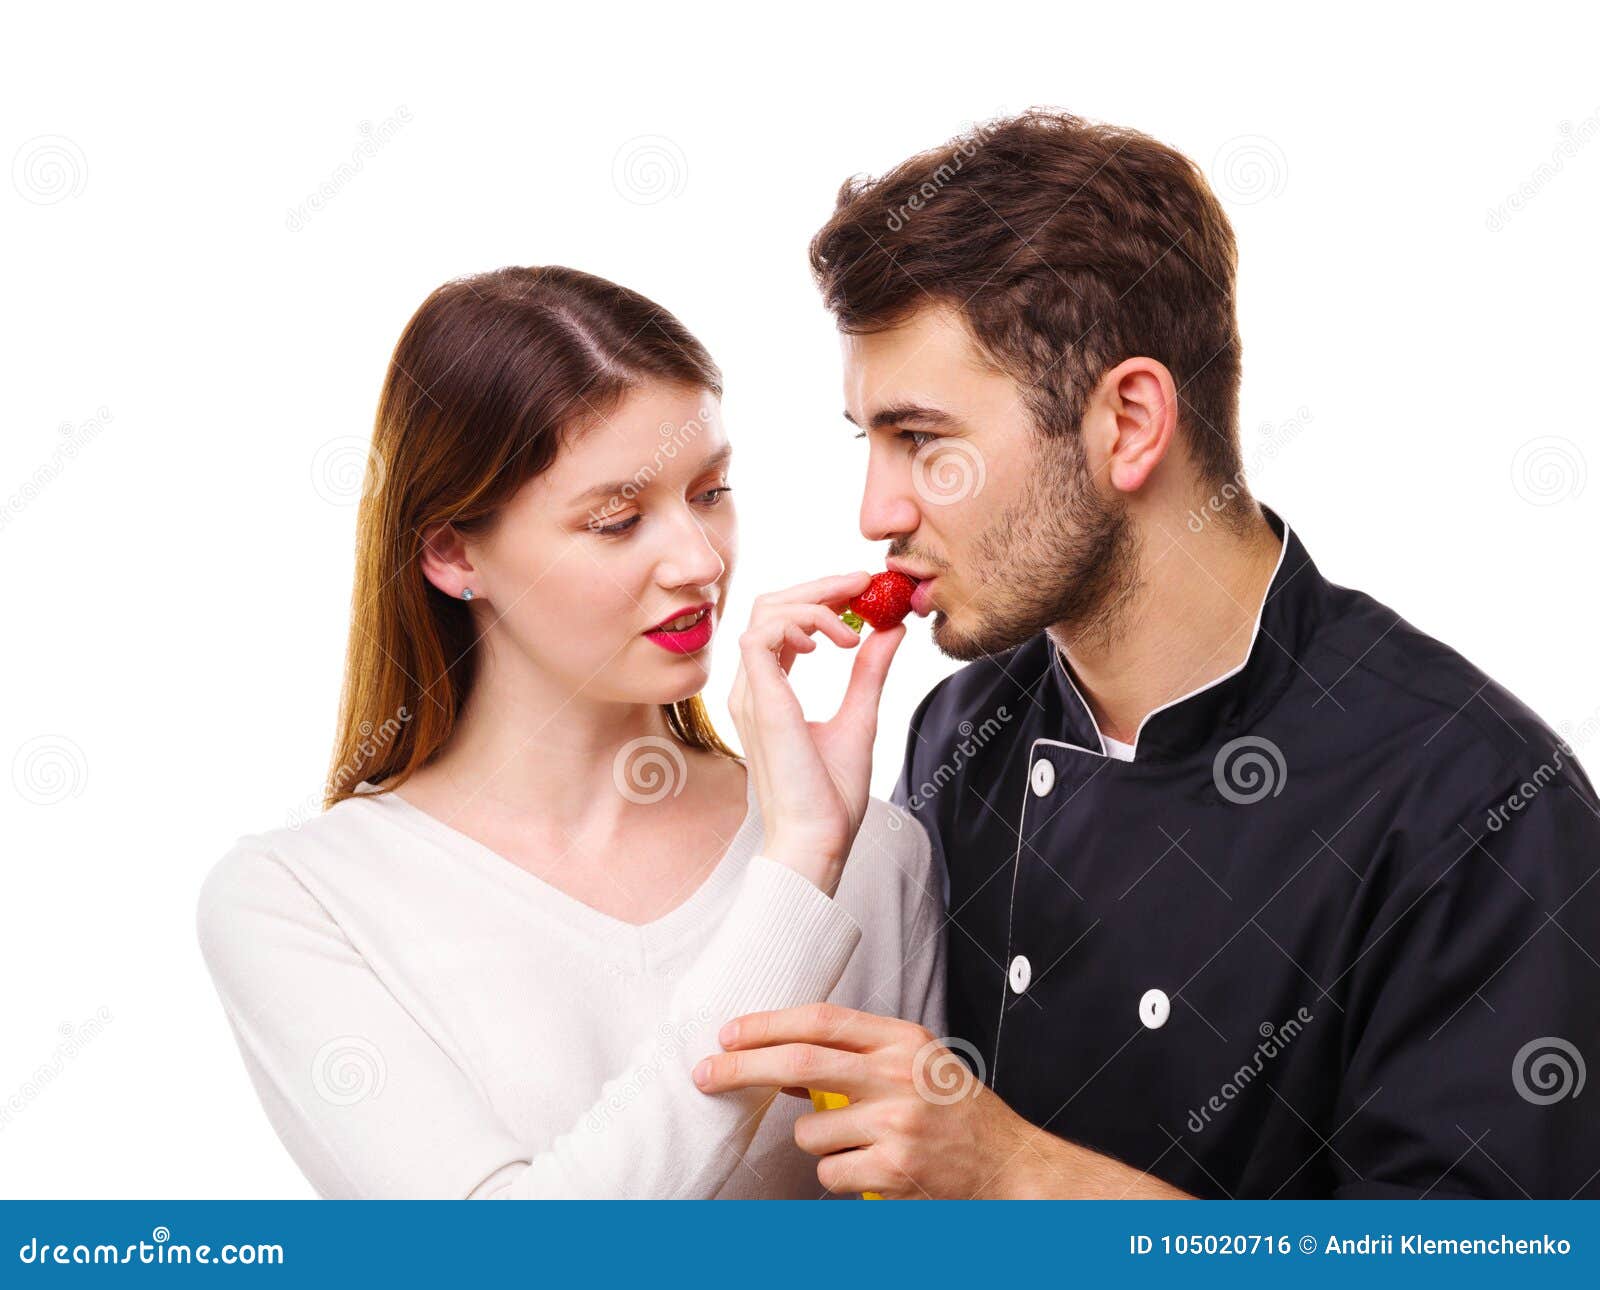 Close-up of a Girl Feeding a Guy with a Strawberry, on a White Background Stock Photo